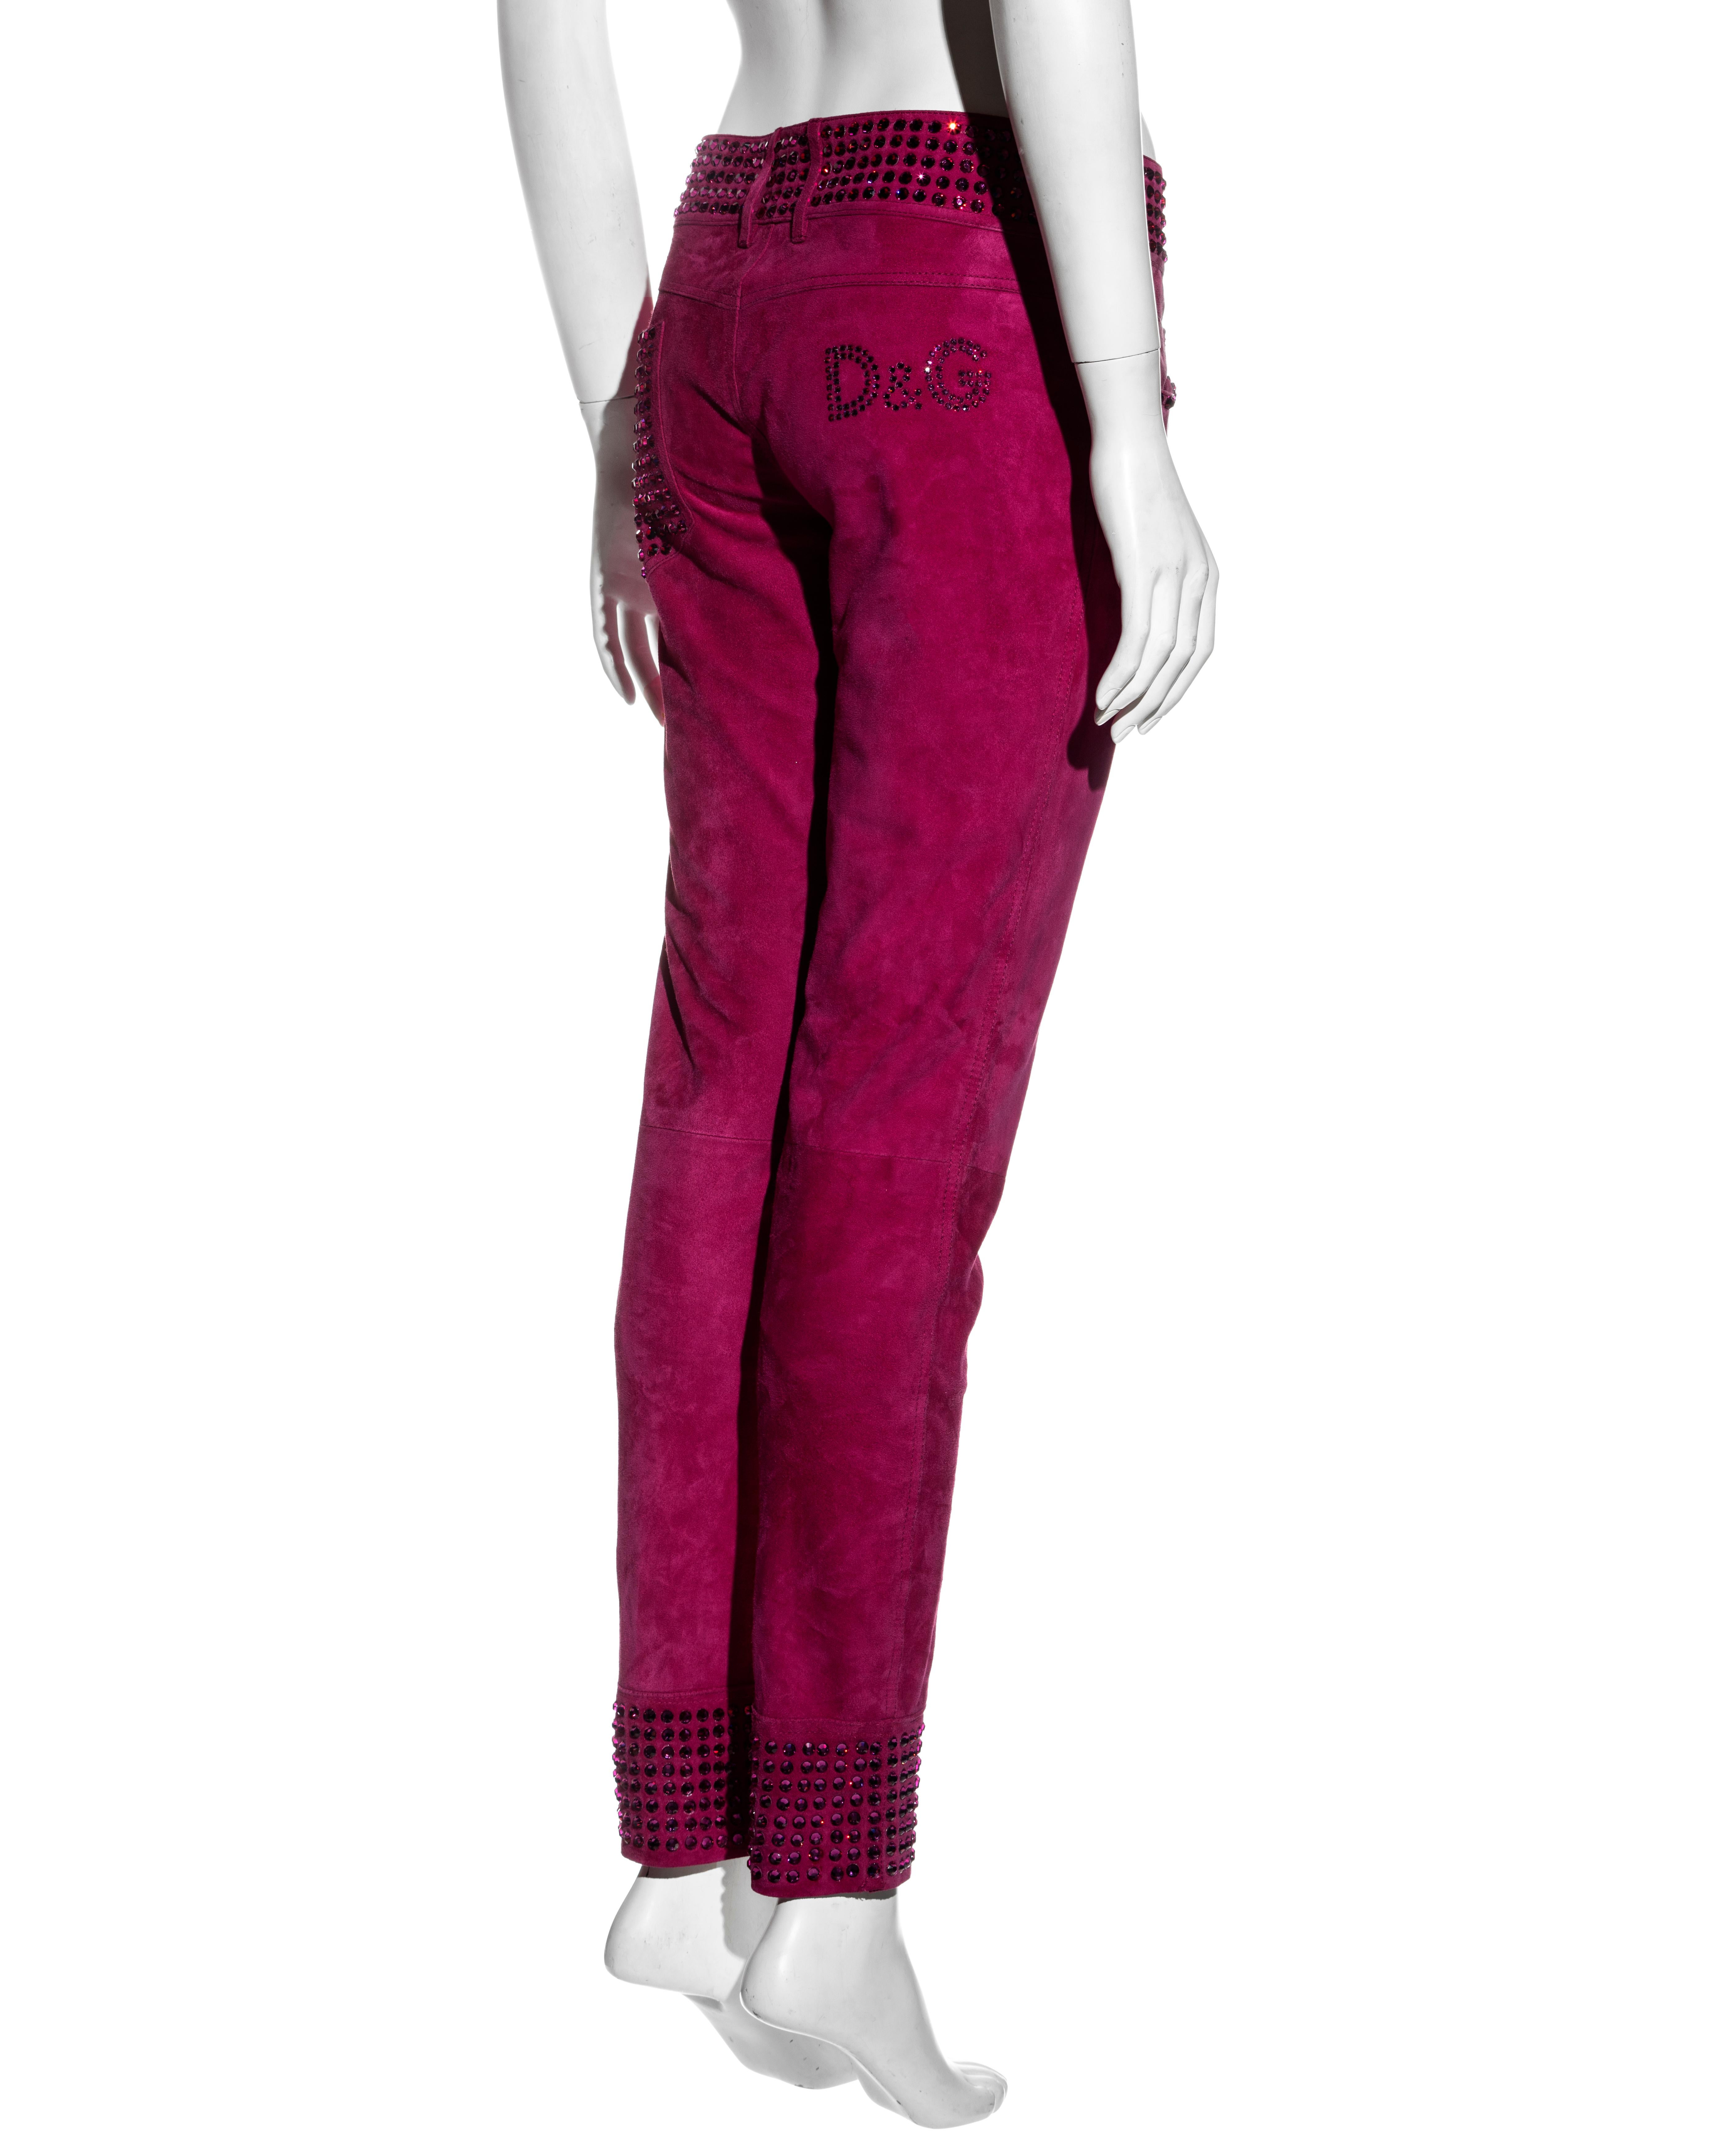 Women's D&G by Dolce & Gabbana pink suede pants with crystals, c. 1998-1999